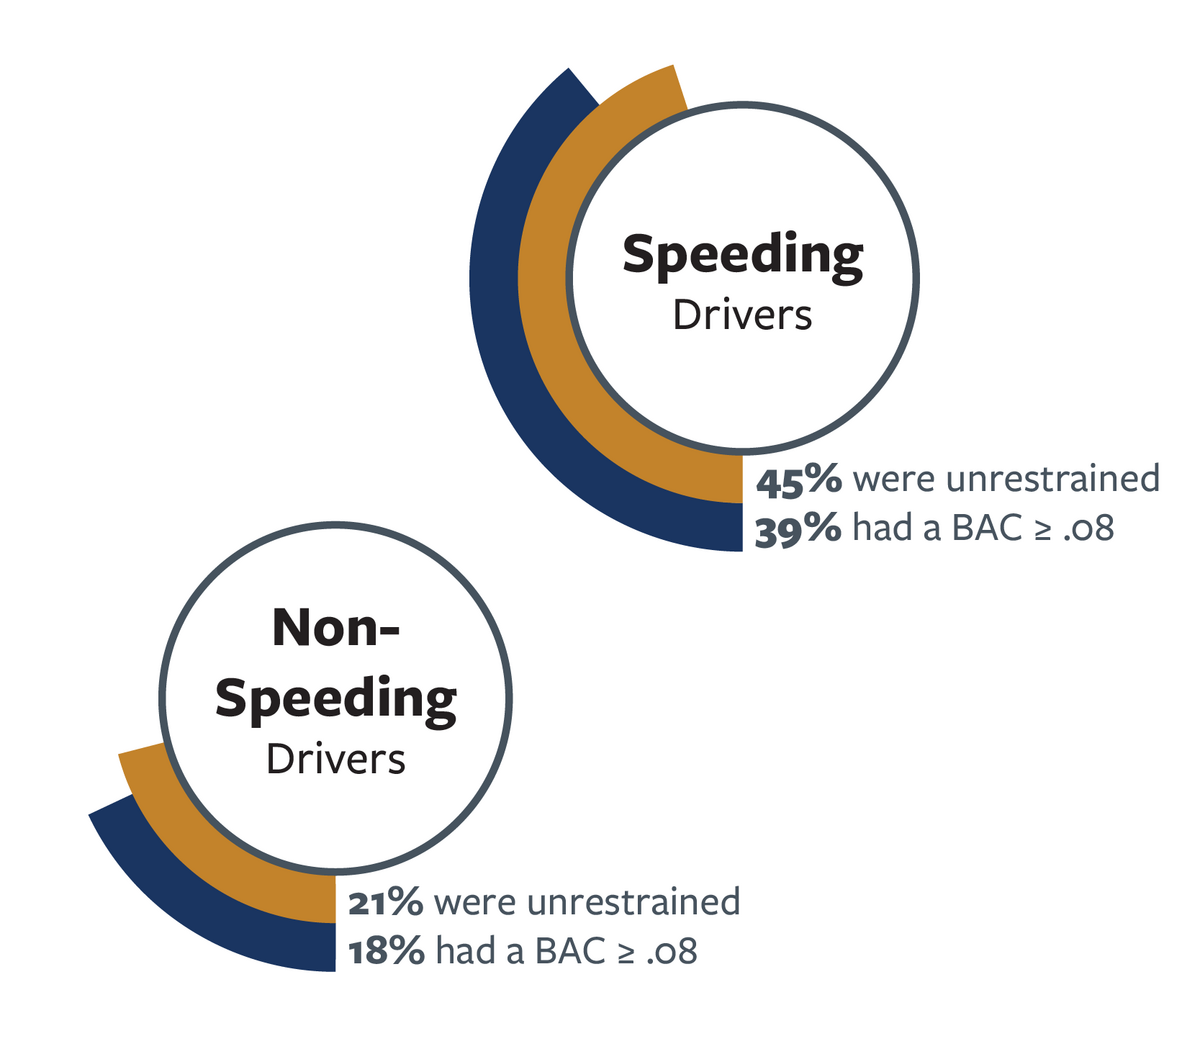 National comparison of speeding versus non-speeding drivers in 2021 with regards to blood alcohol content levels and seat belt restraint use. For more information, go to the following summary.